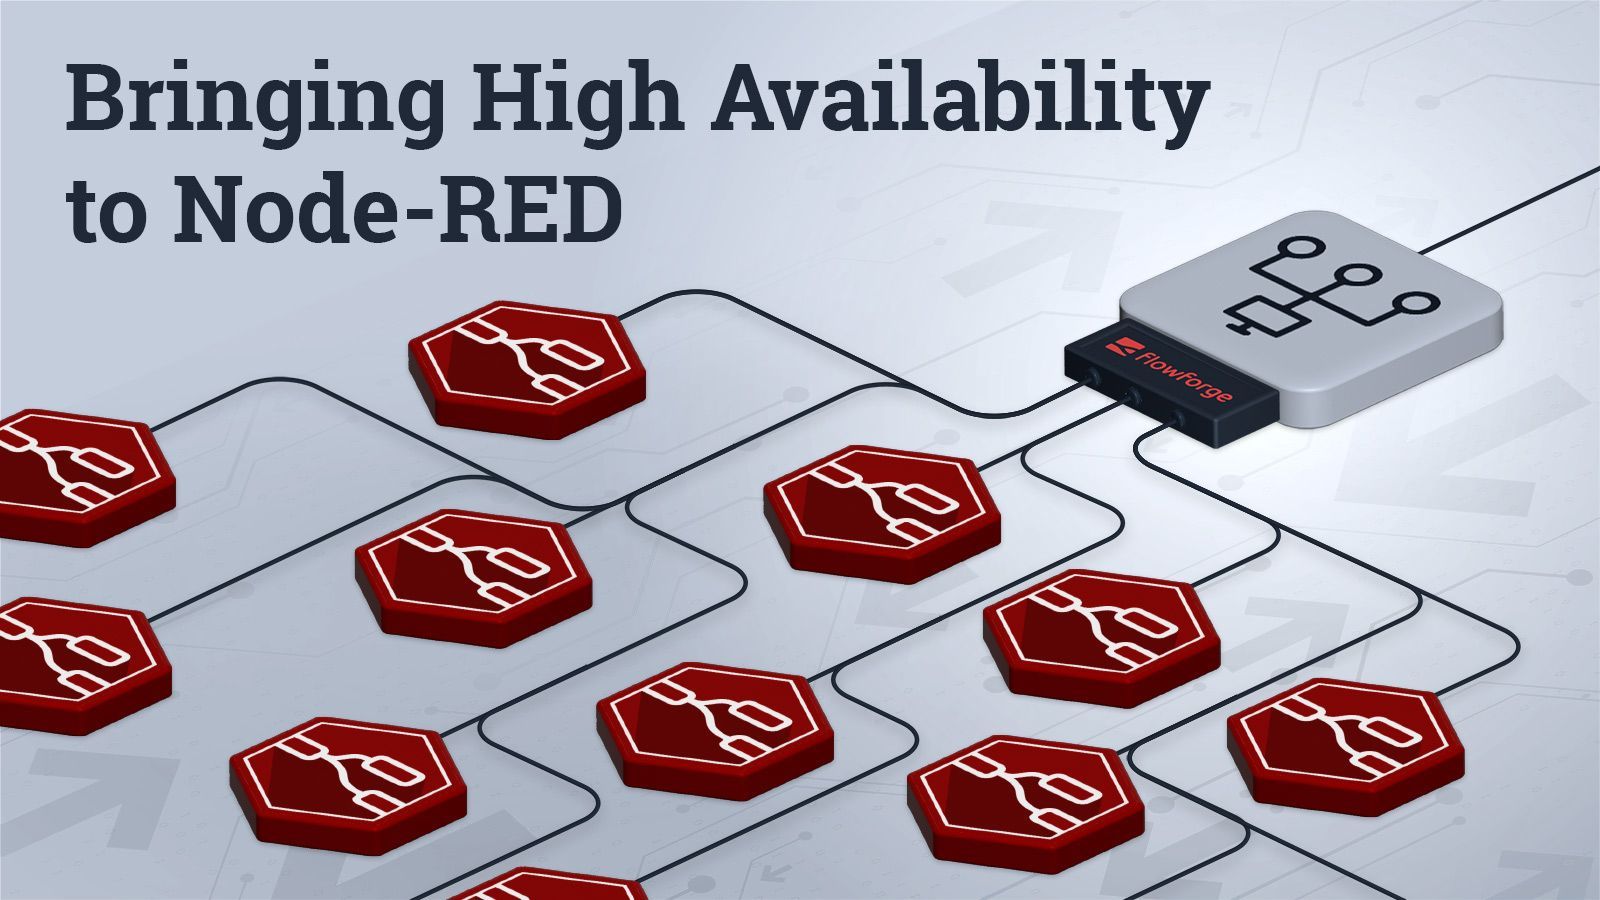 Image representing Bringing High Availability to Node-RED